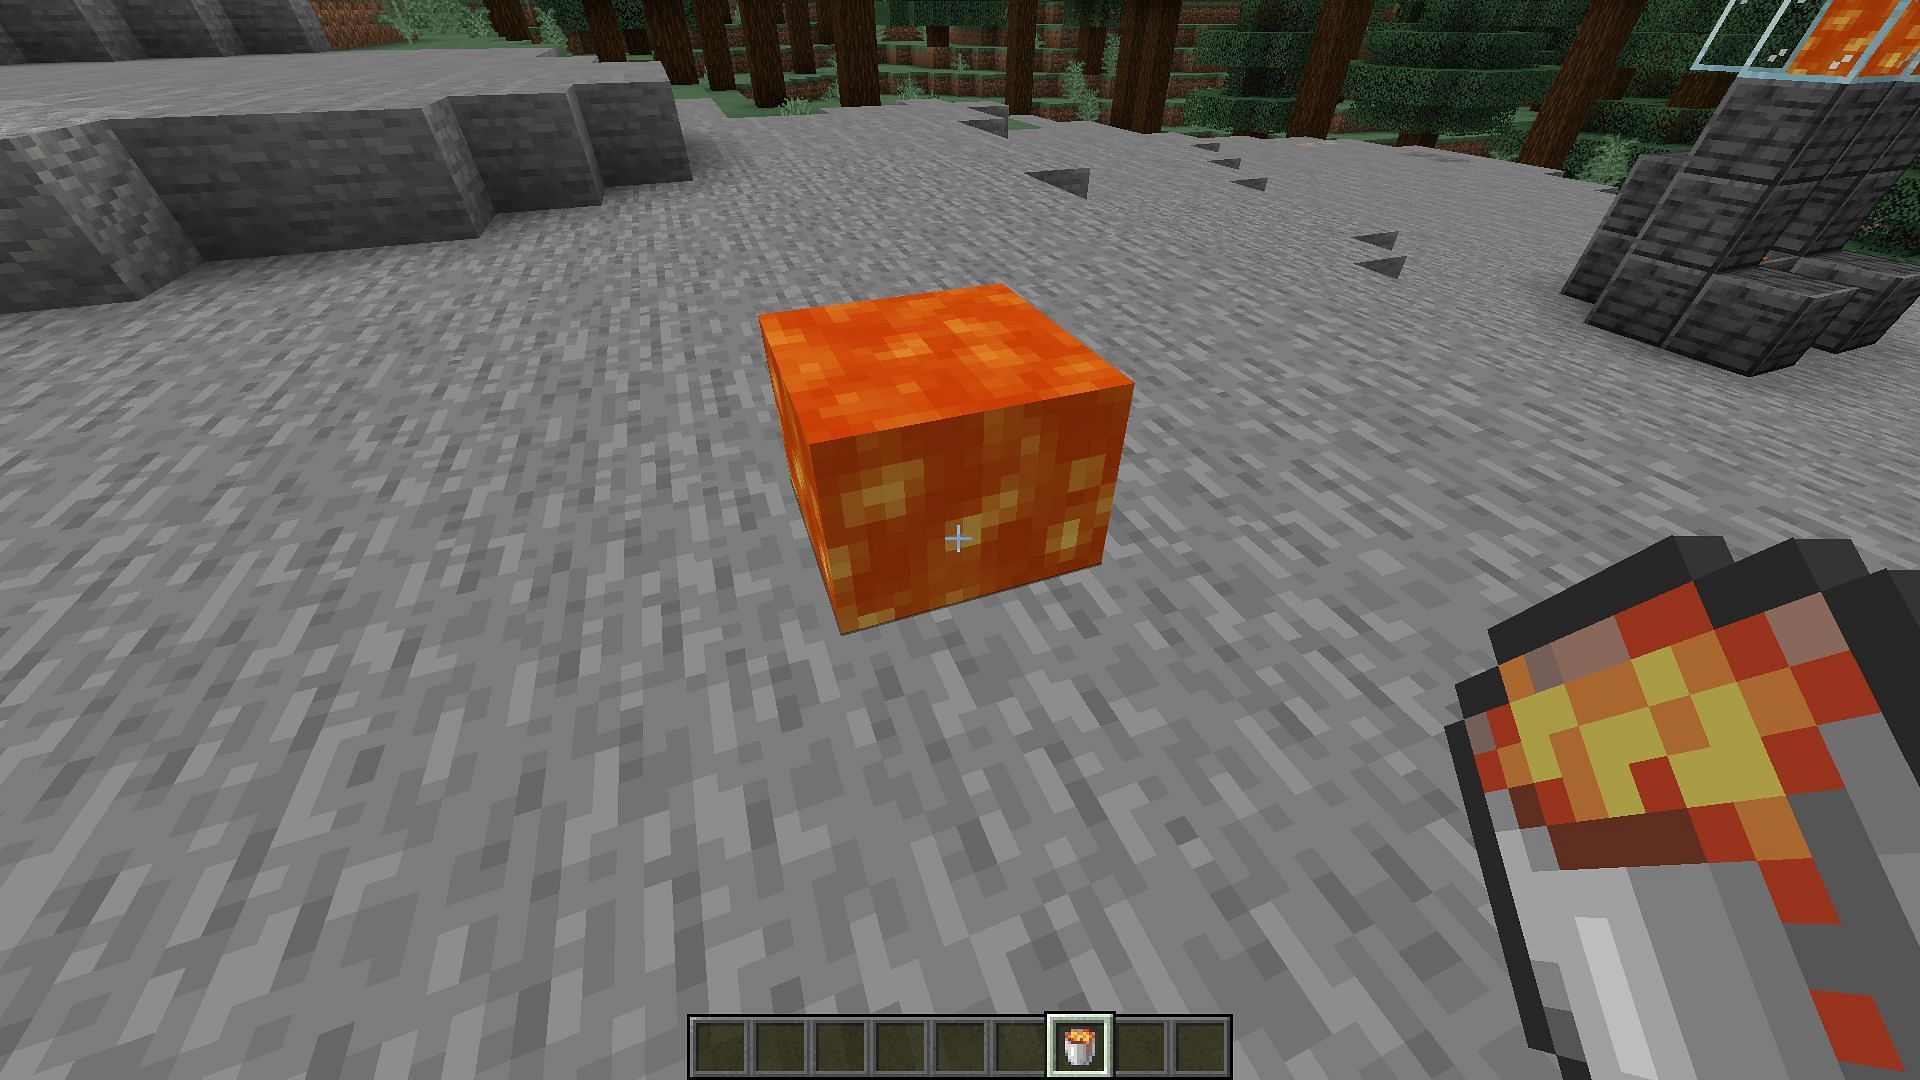 Players can use lava or cactus to entirely destroy useless items in Minecraft (Image via Mojang)